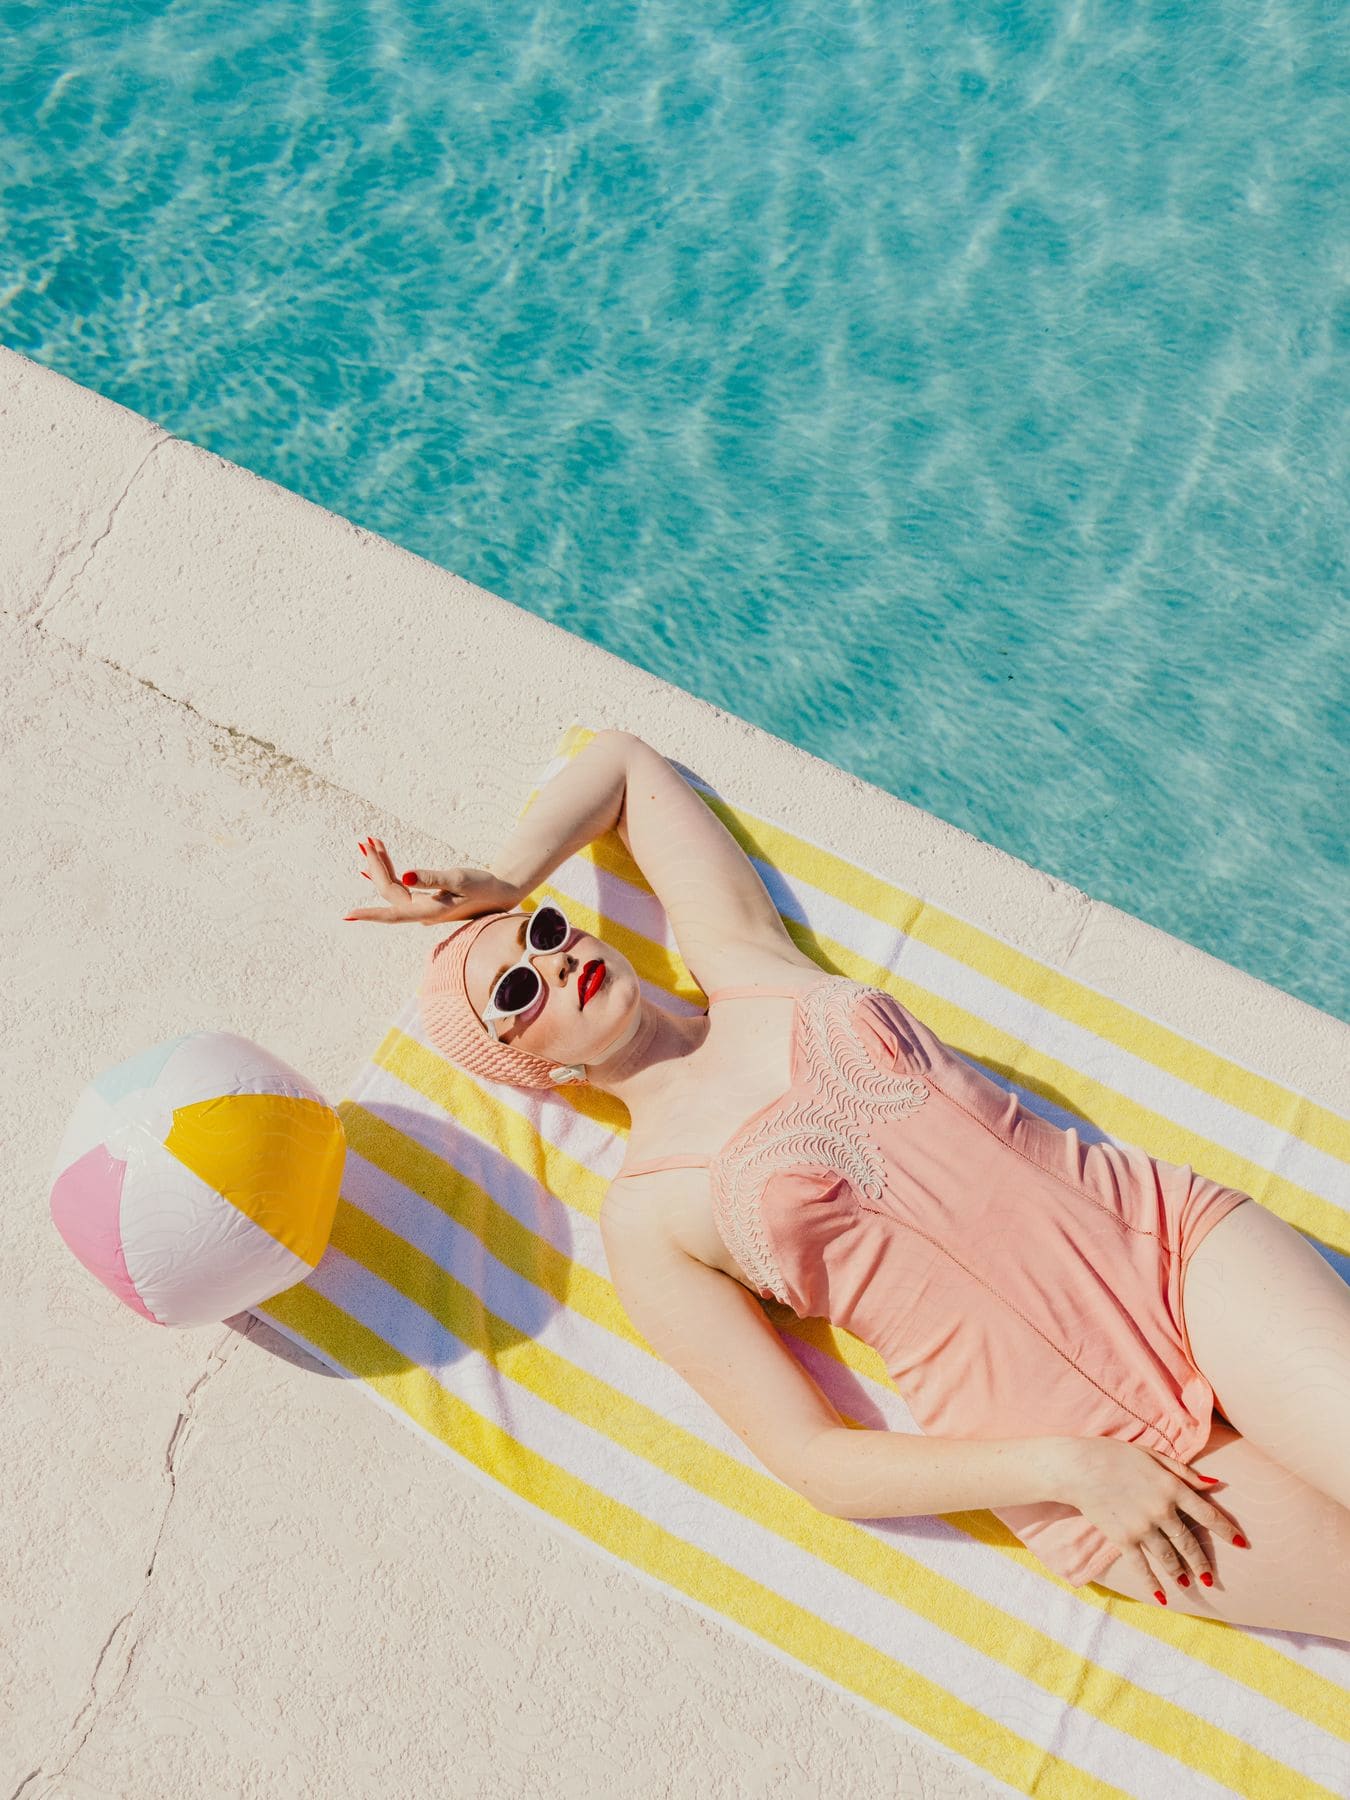 A woman in a swimsuit is sunbathing next to a pool with crystal clear water.